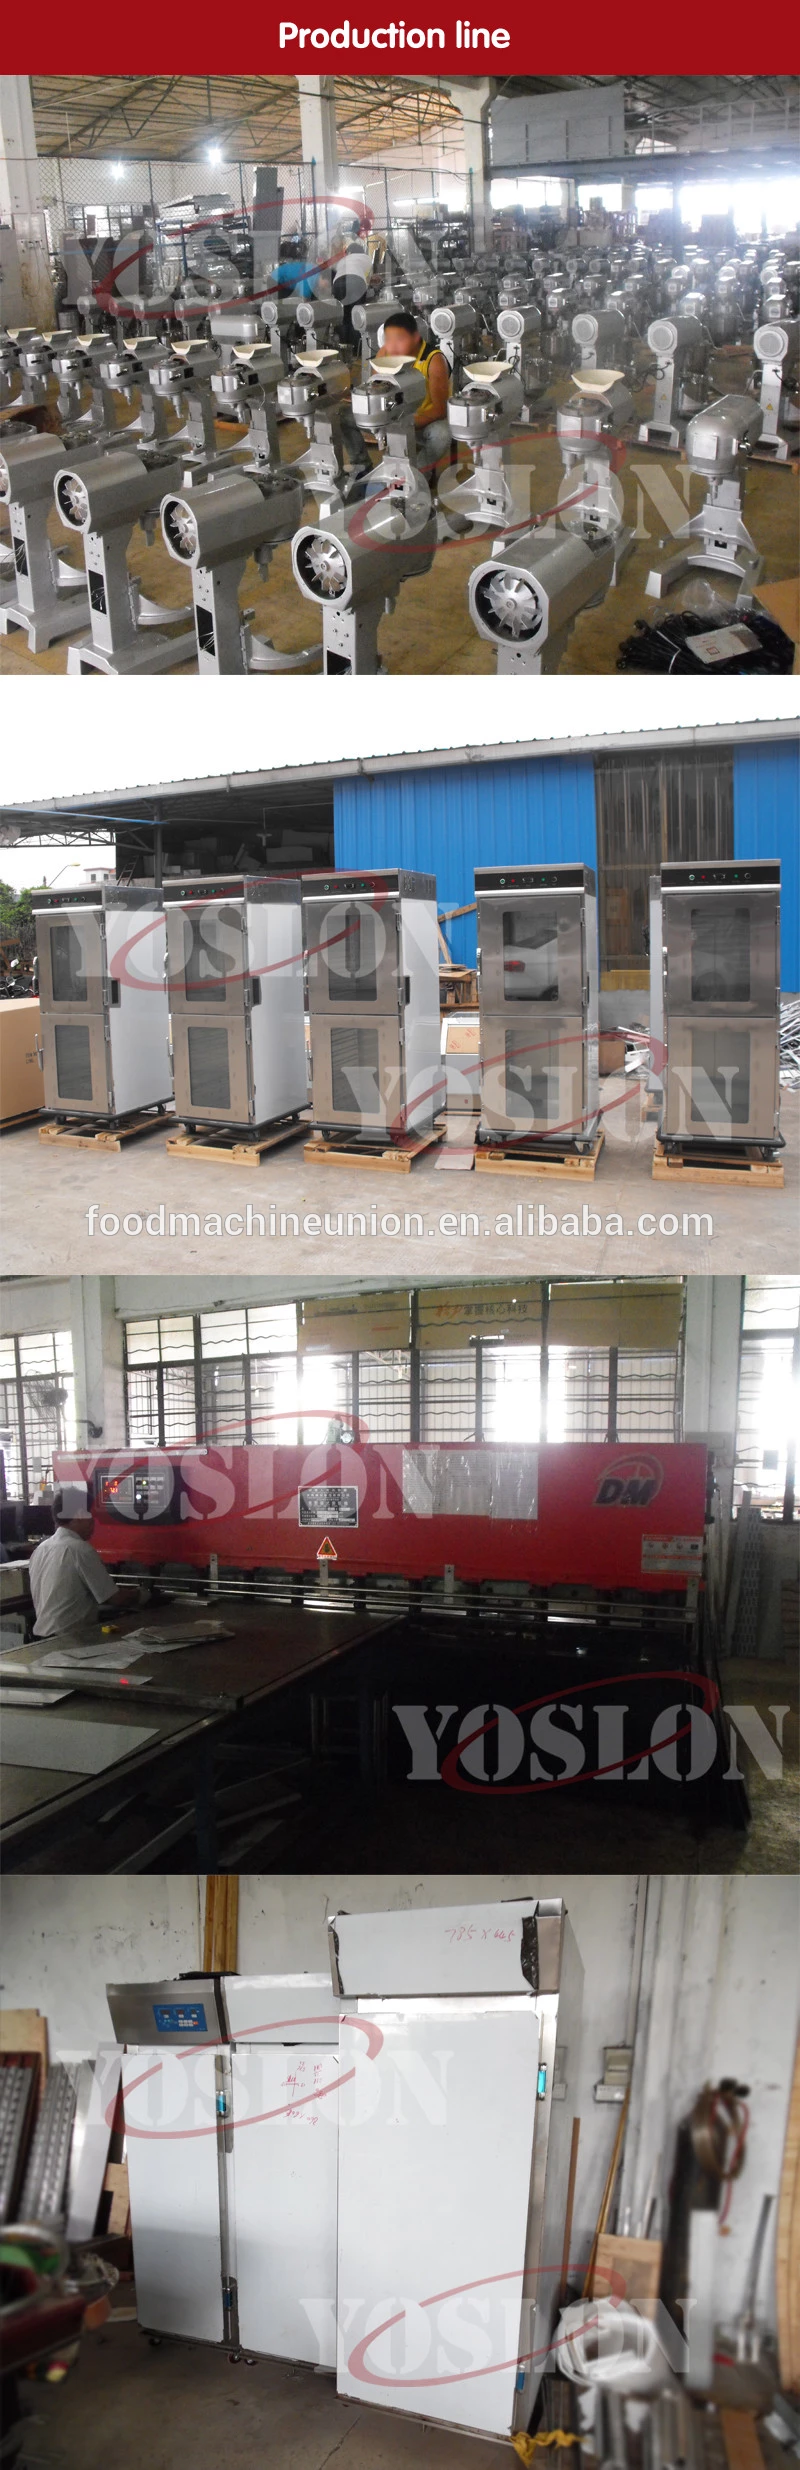 Excellent quality new fashion high capacity ice cream machine